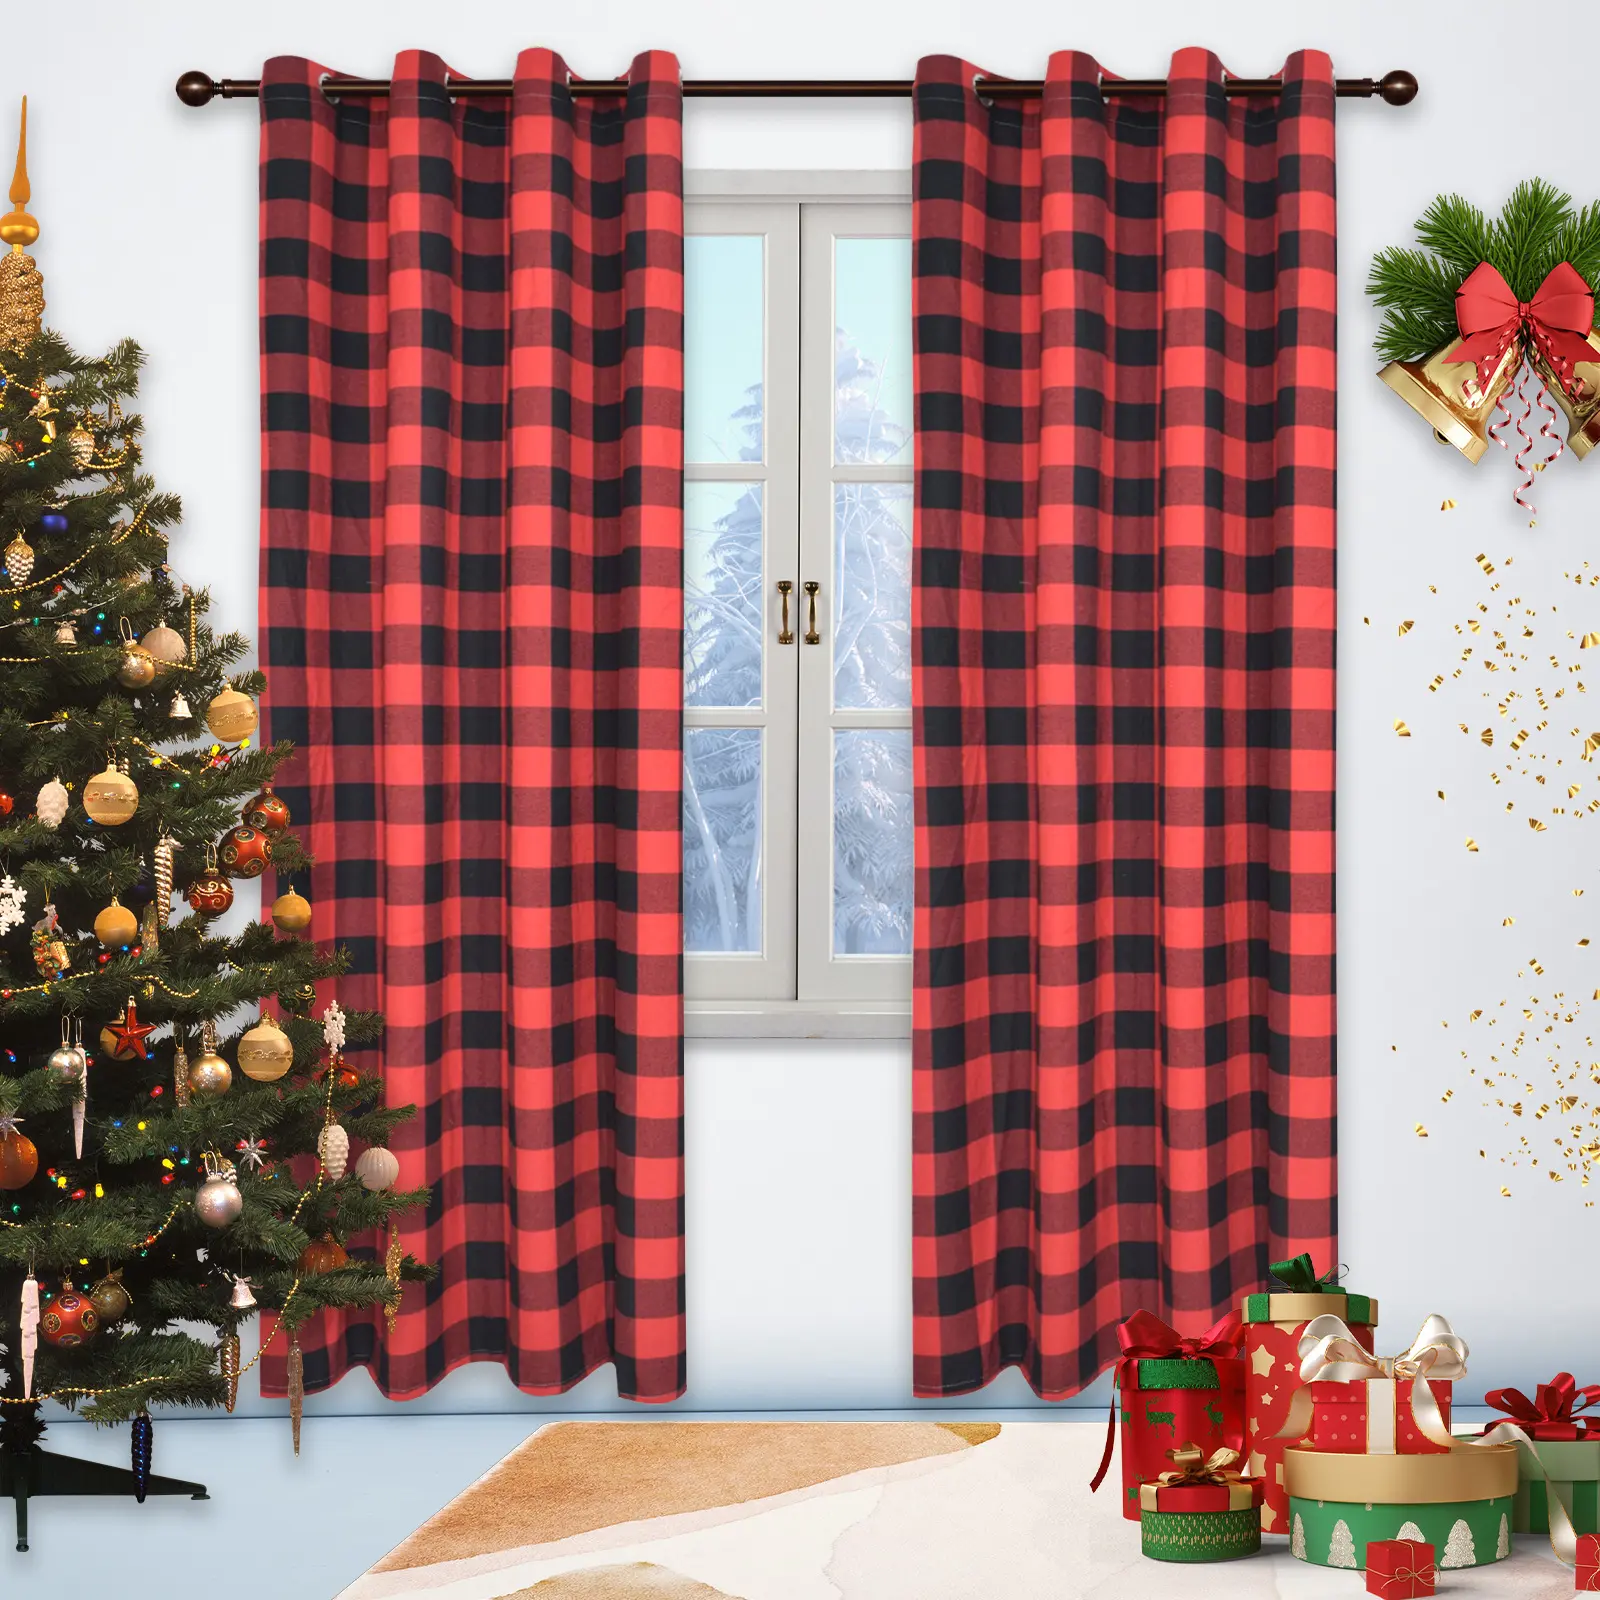 Wholesale Plaid Christmas Curtain Curtain Supplier for The Living Room, Christmas Woven 100% Polyester Modern Geometric Grommet